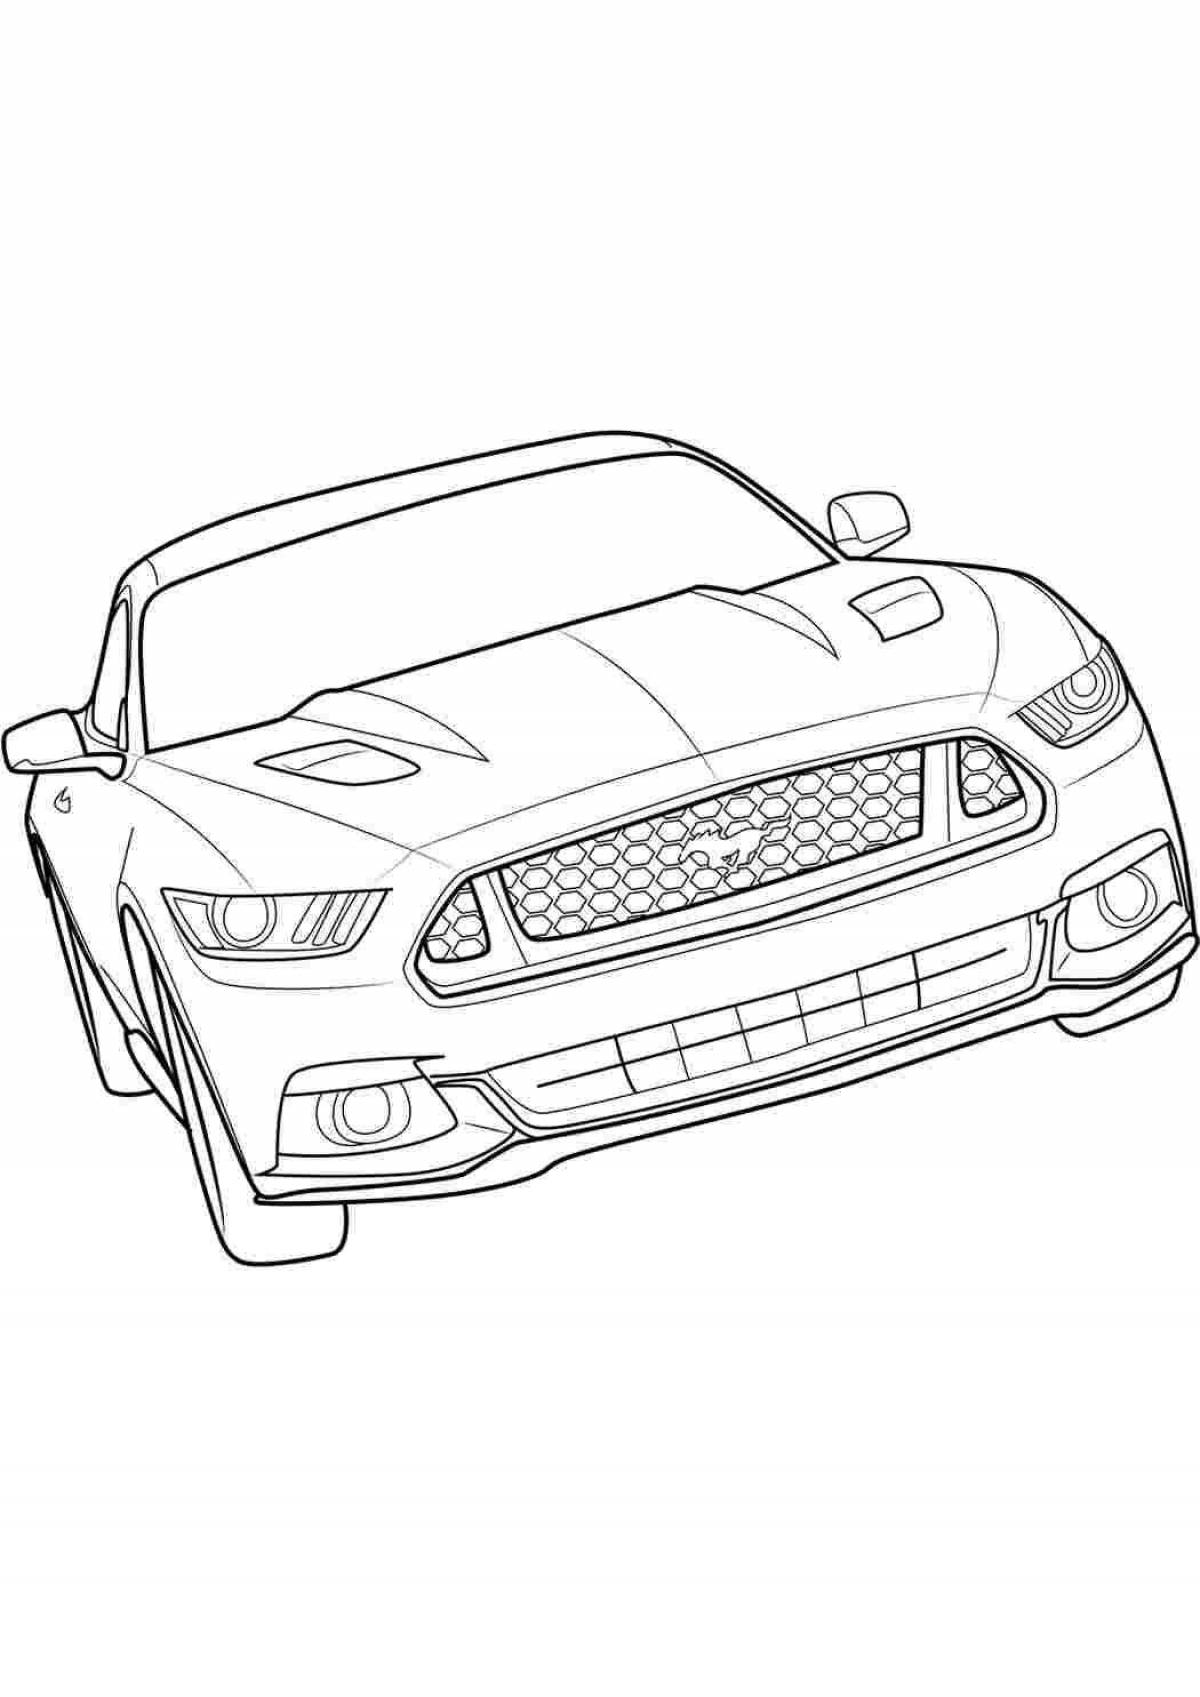 Dazzling mustang coloring pages for boys